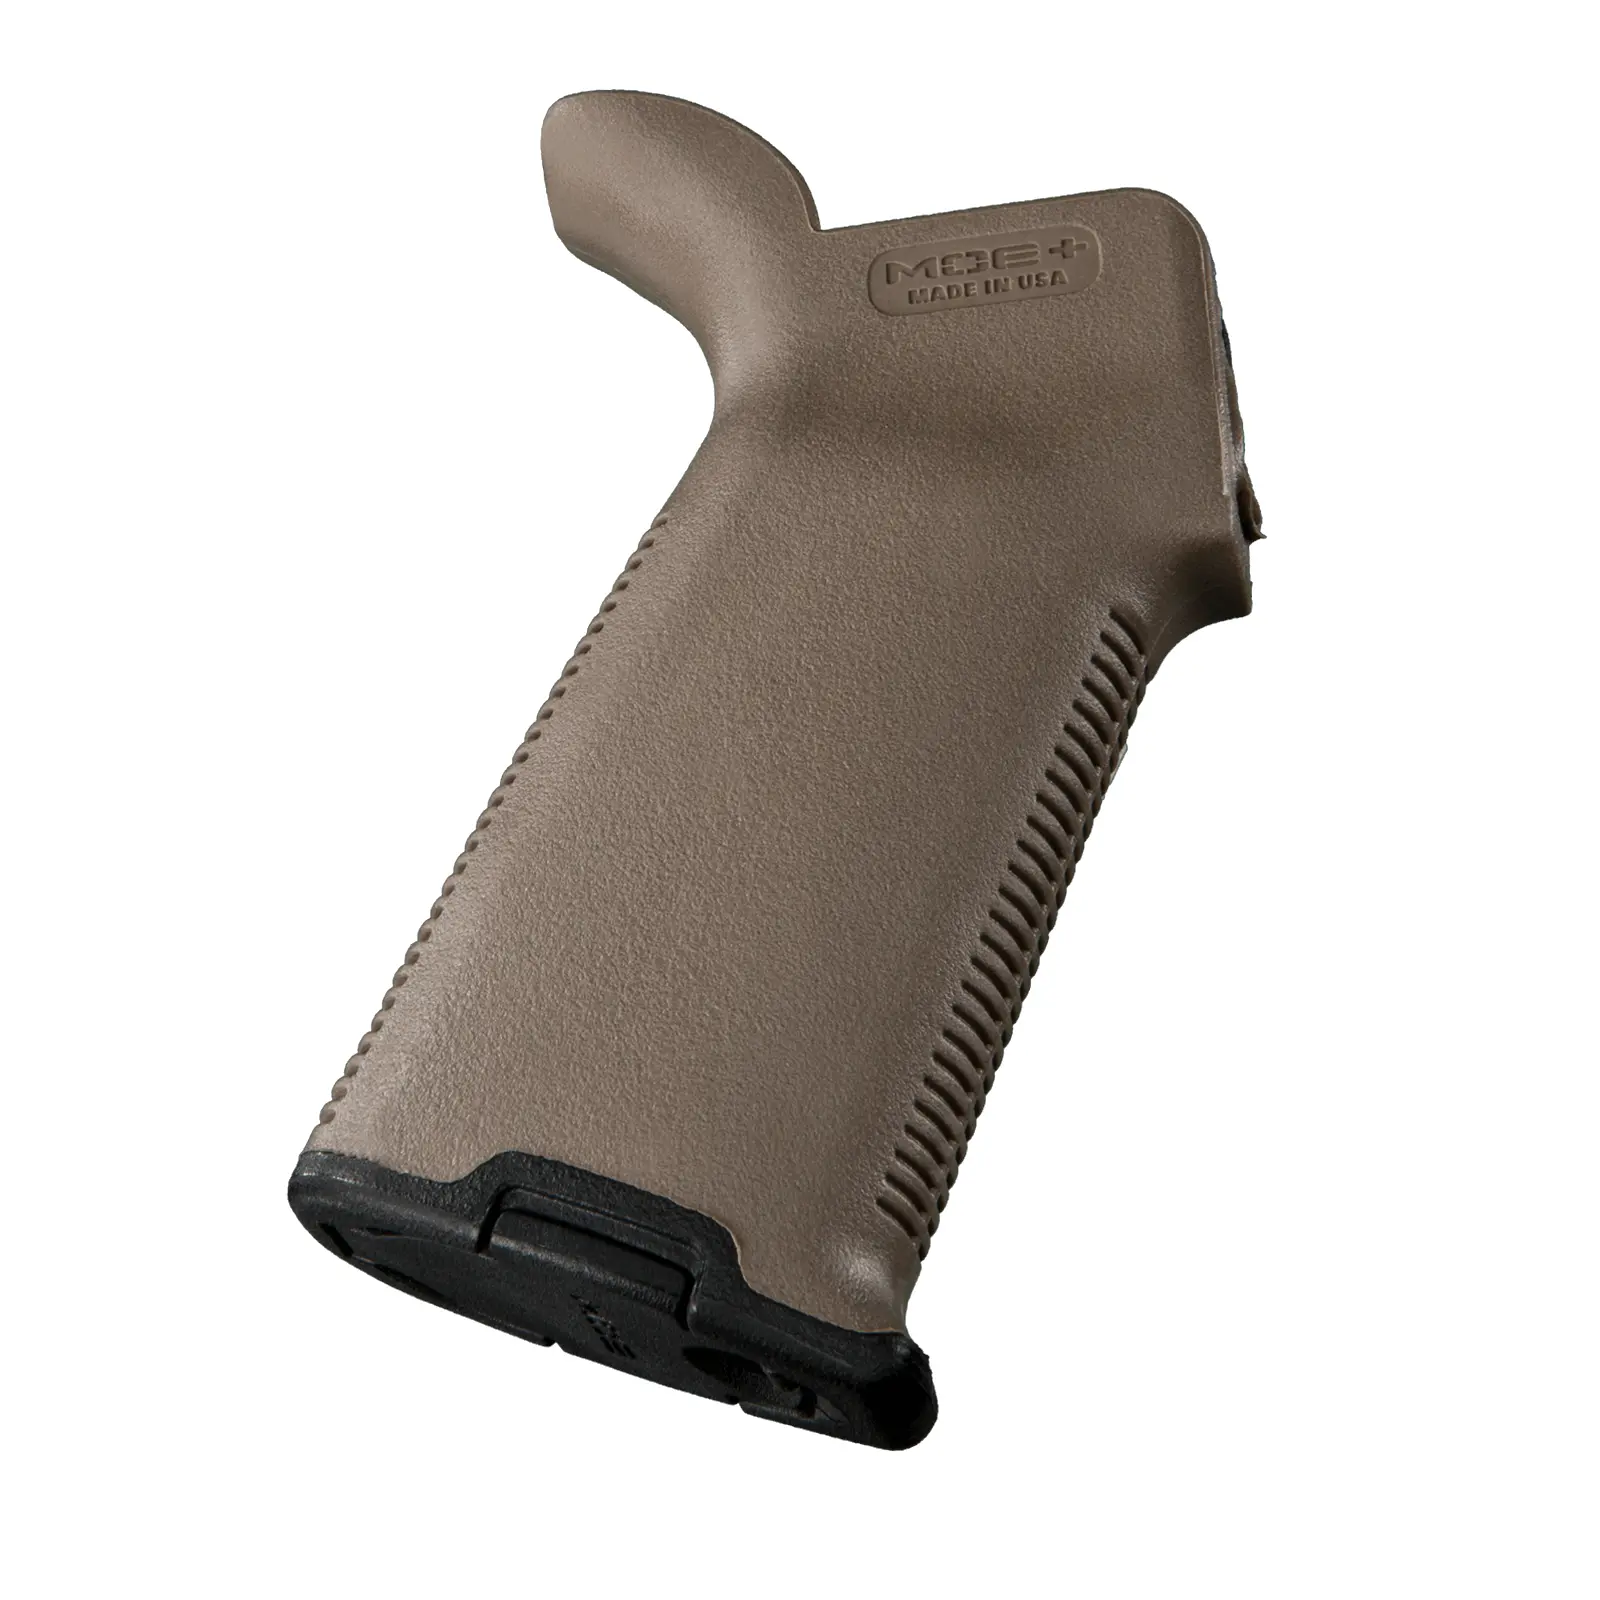 Magpul MOE+ Grip w/ Storage Compartment – Pistol Grip for AR-15 – MAG416